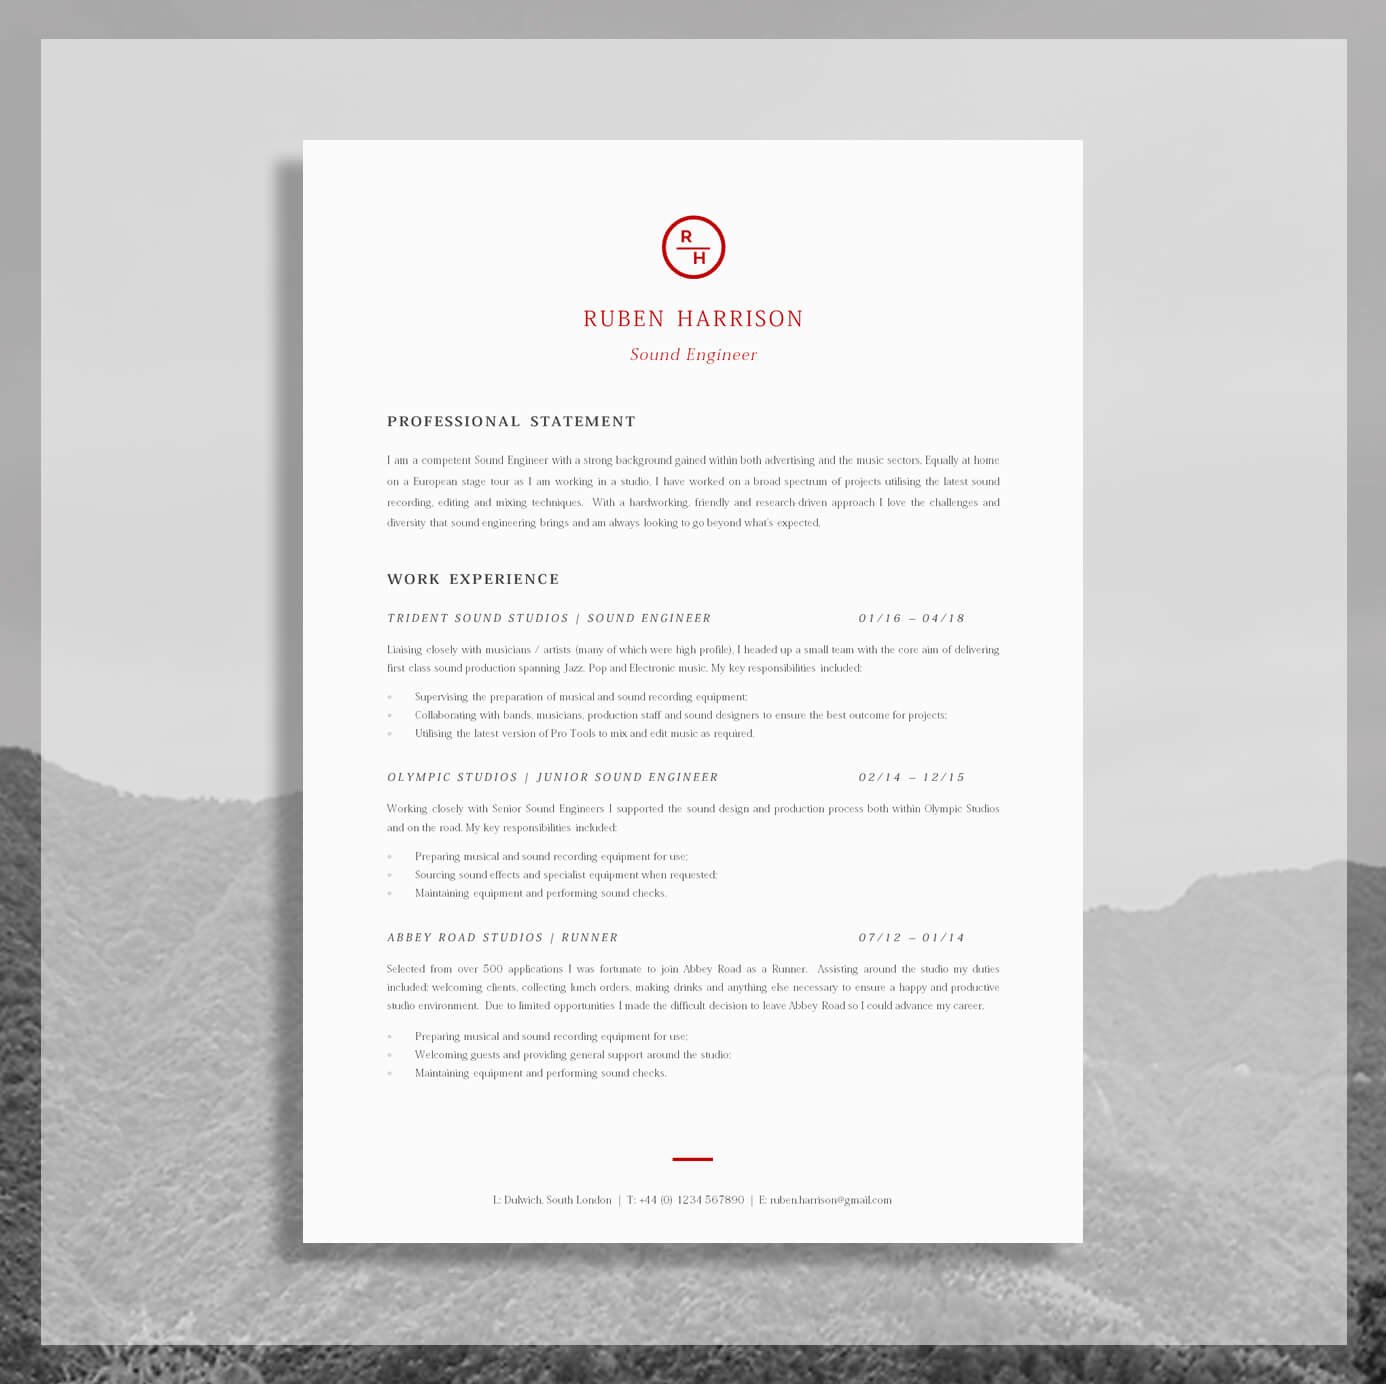 The free, professional CV on A4 paper is a two-page resume